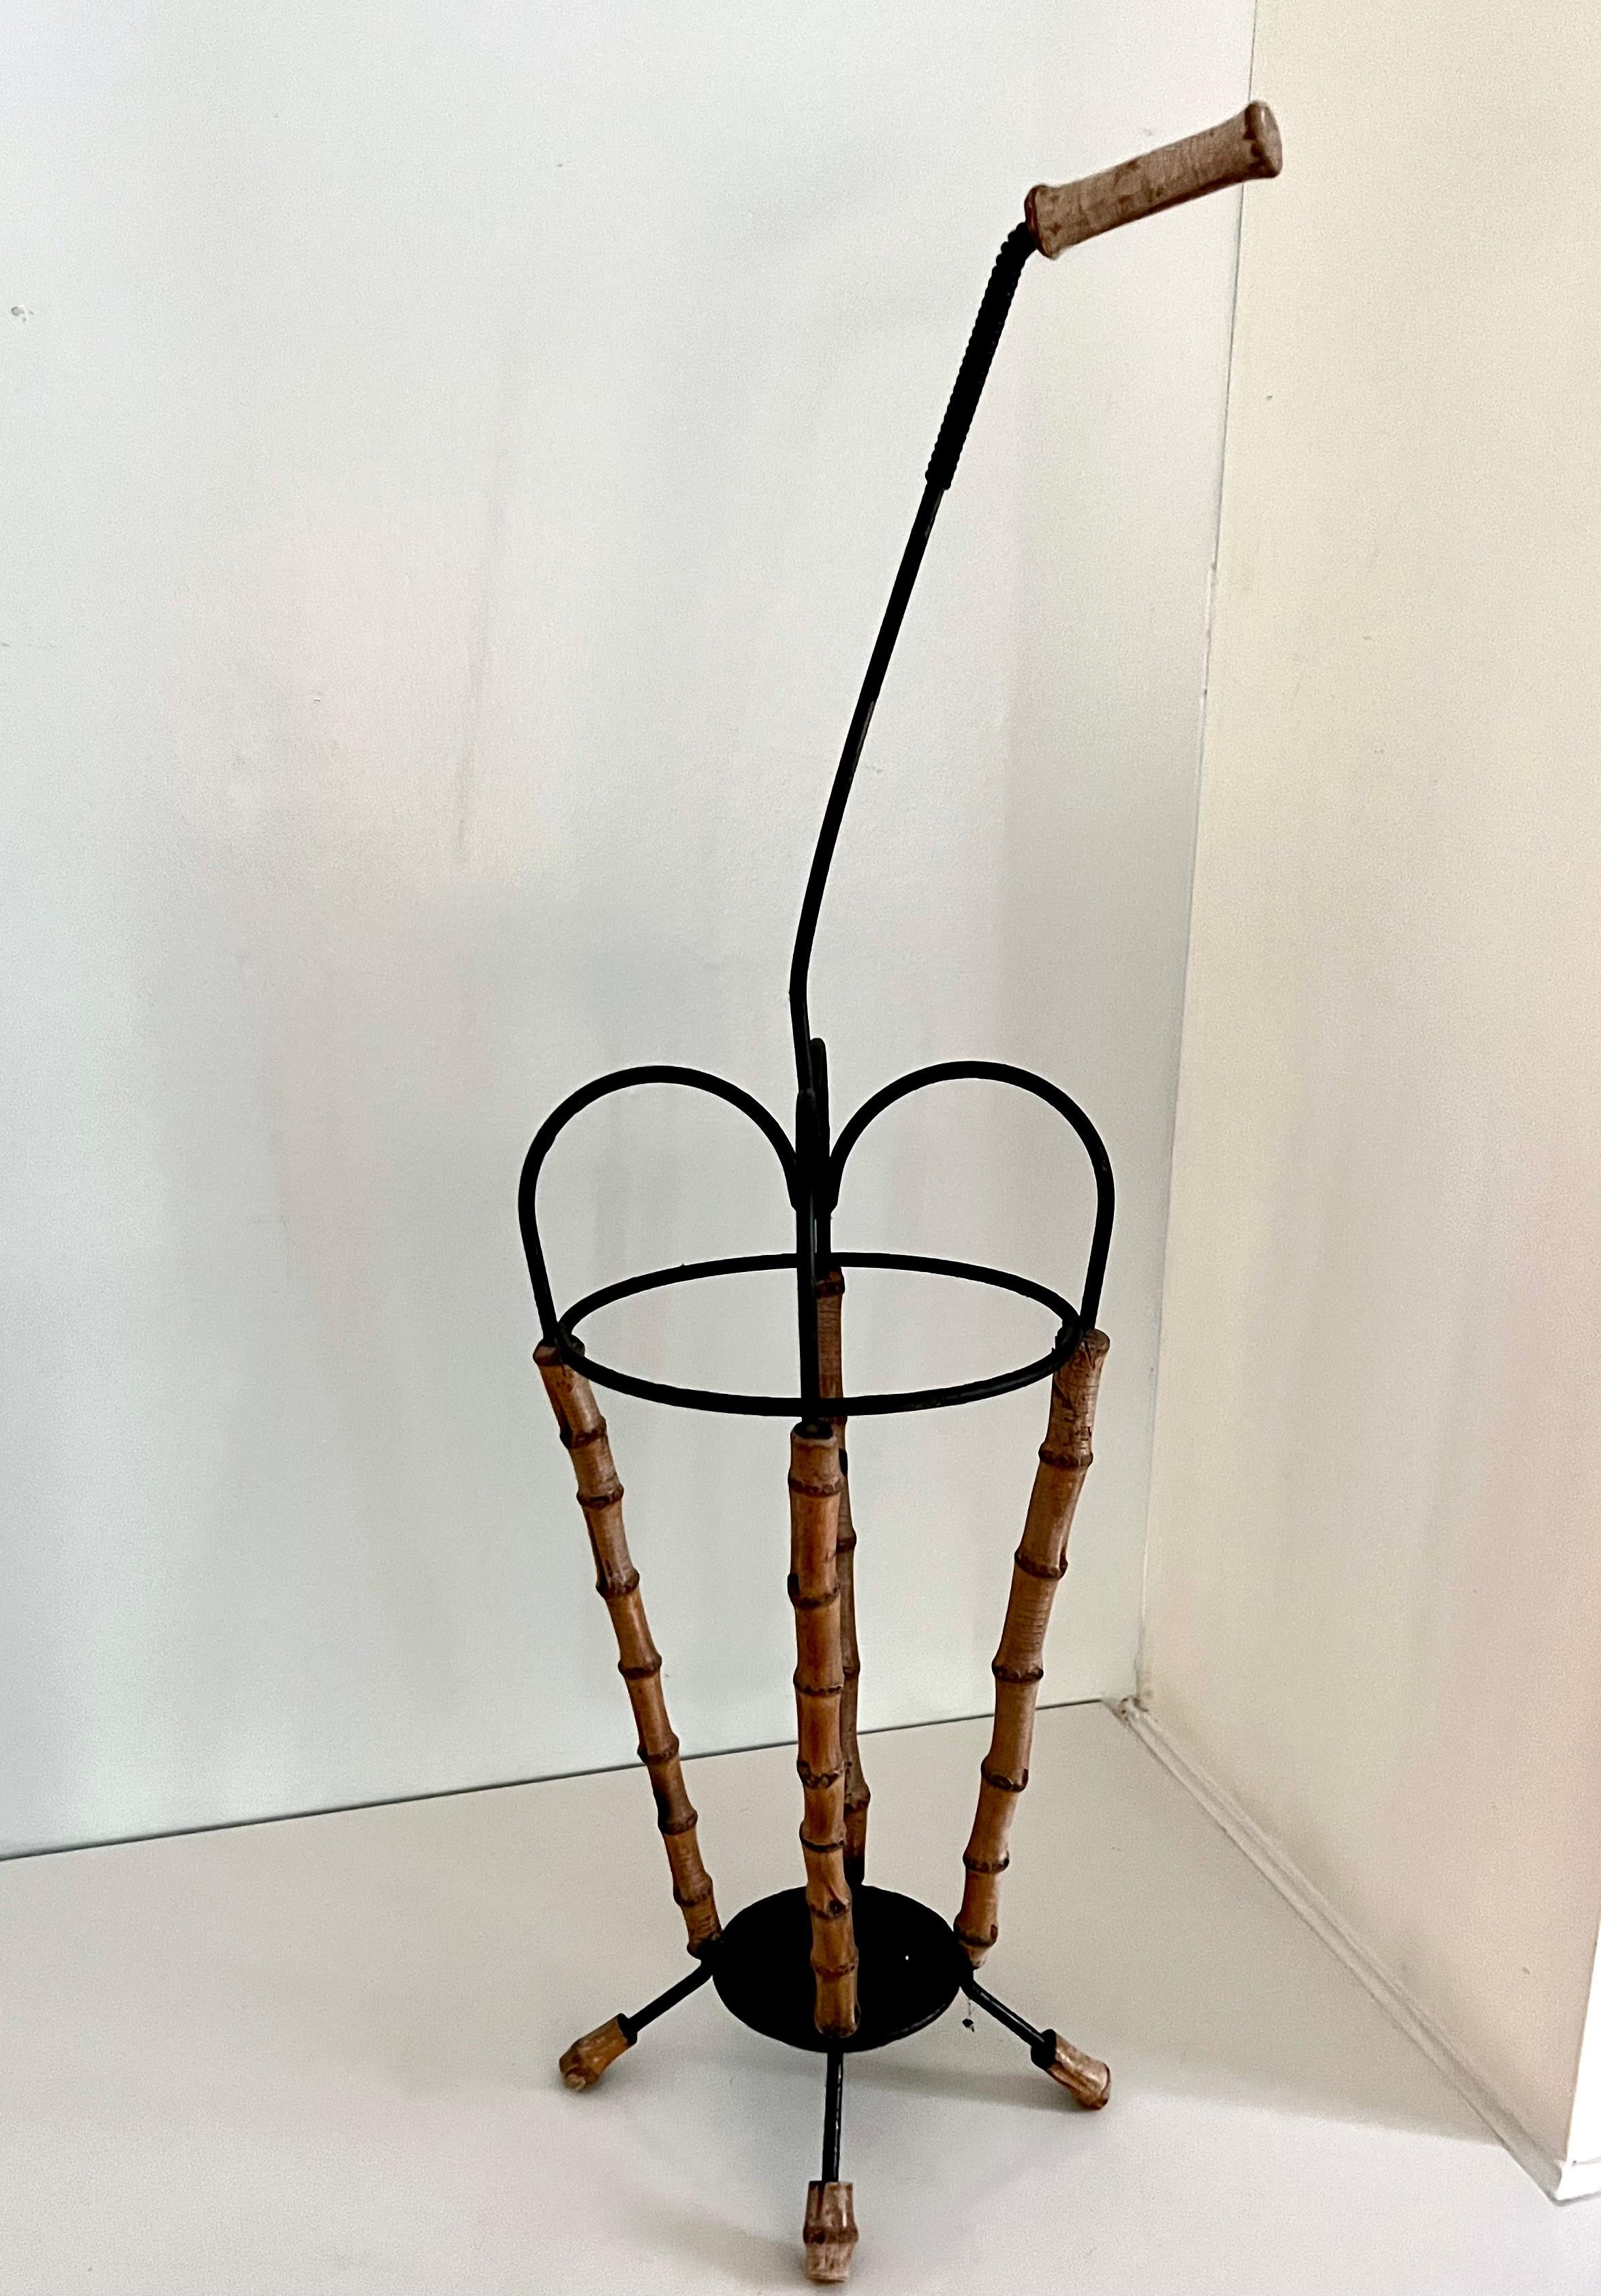 Unique mid-century footed umbrella holder with bamboo detail and handle. 
A complement to any entryway and a comfort on rainy days. 
Black finish on the metal. The piece is rather light weight but great for areas that need a delicate touch and not